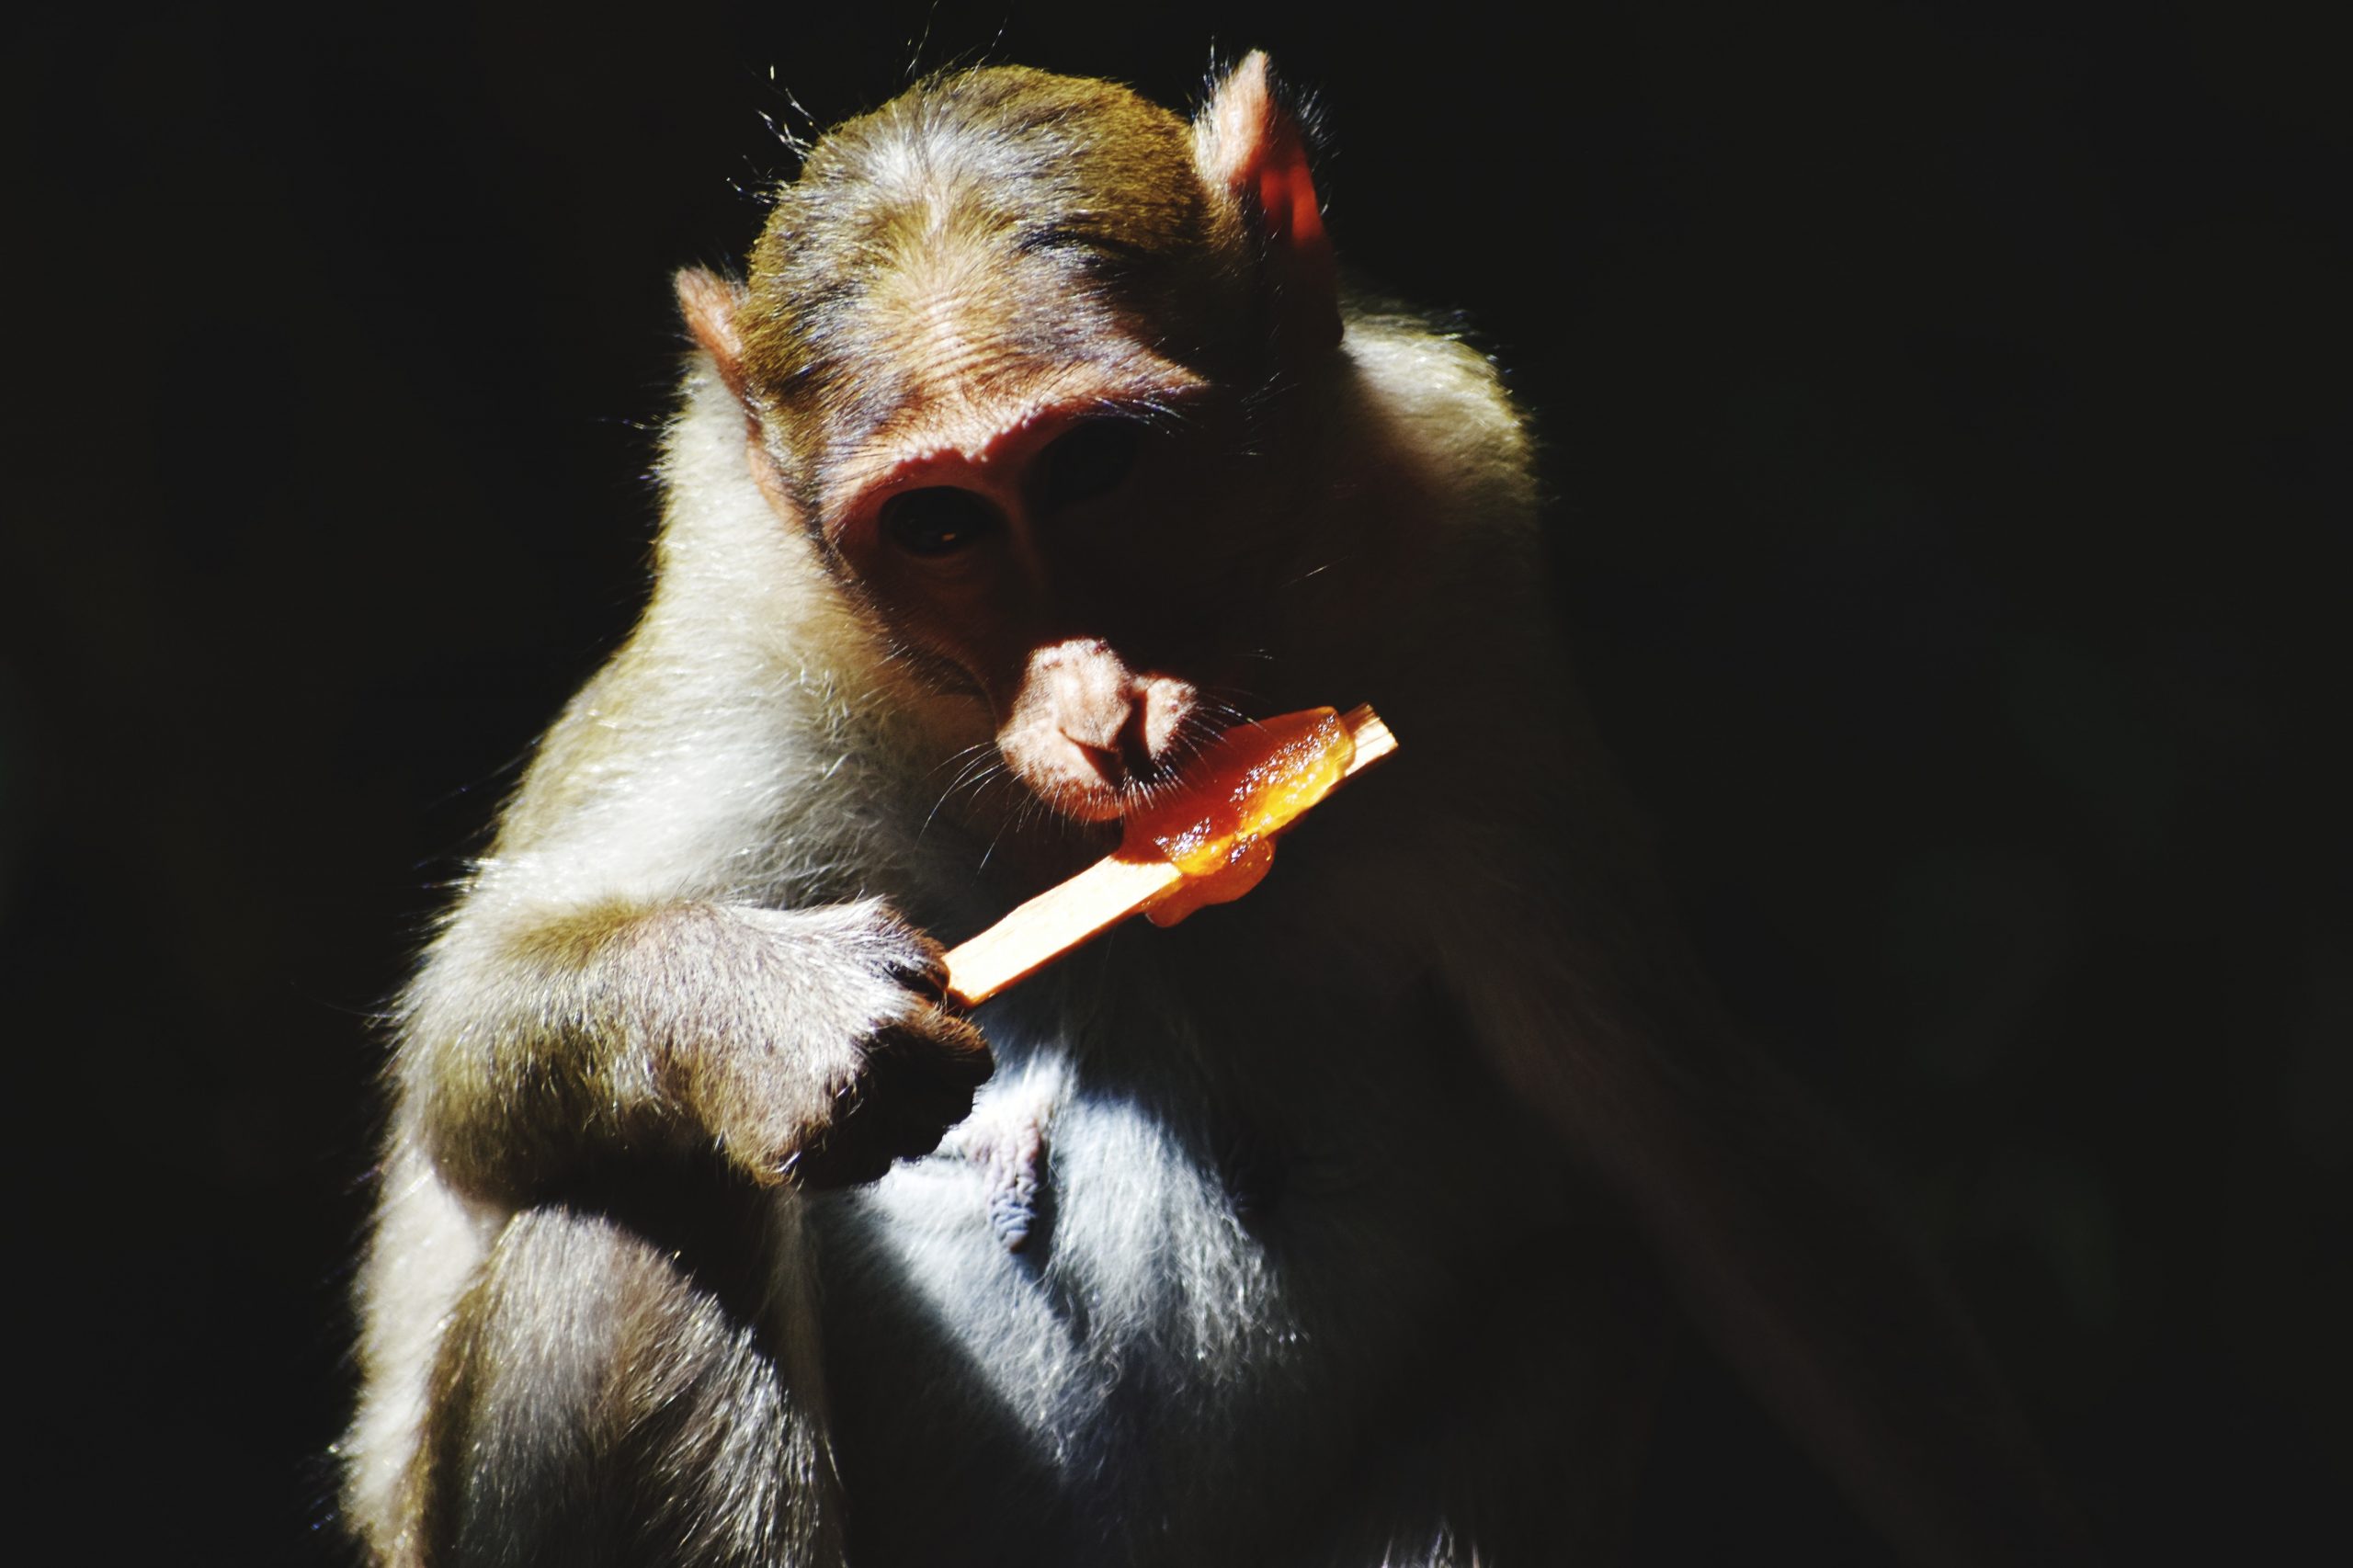 A monkey is eating ice pop